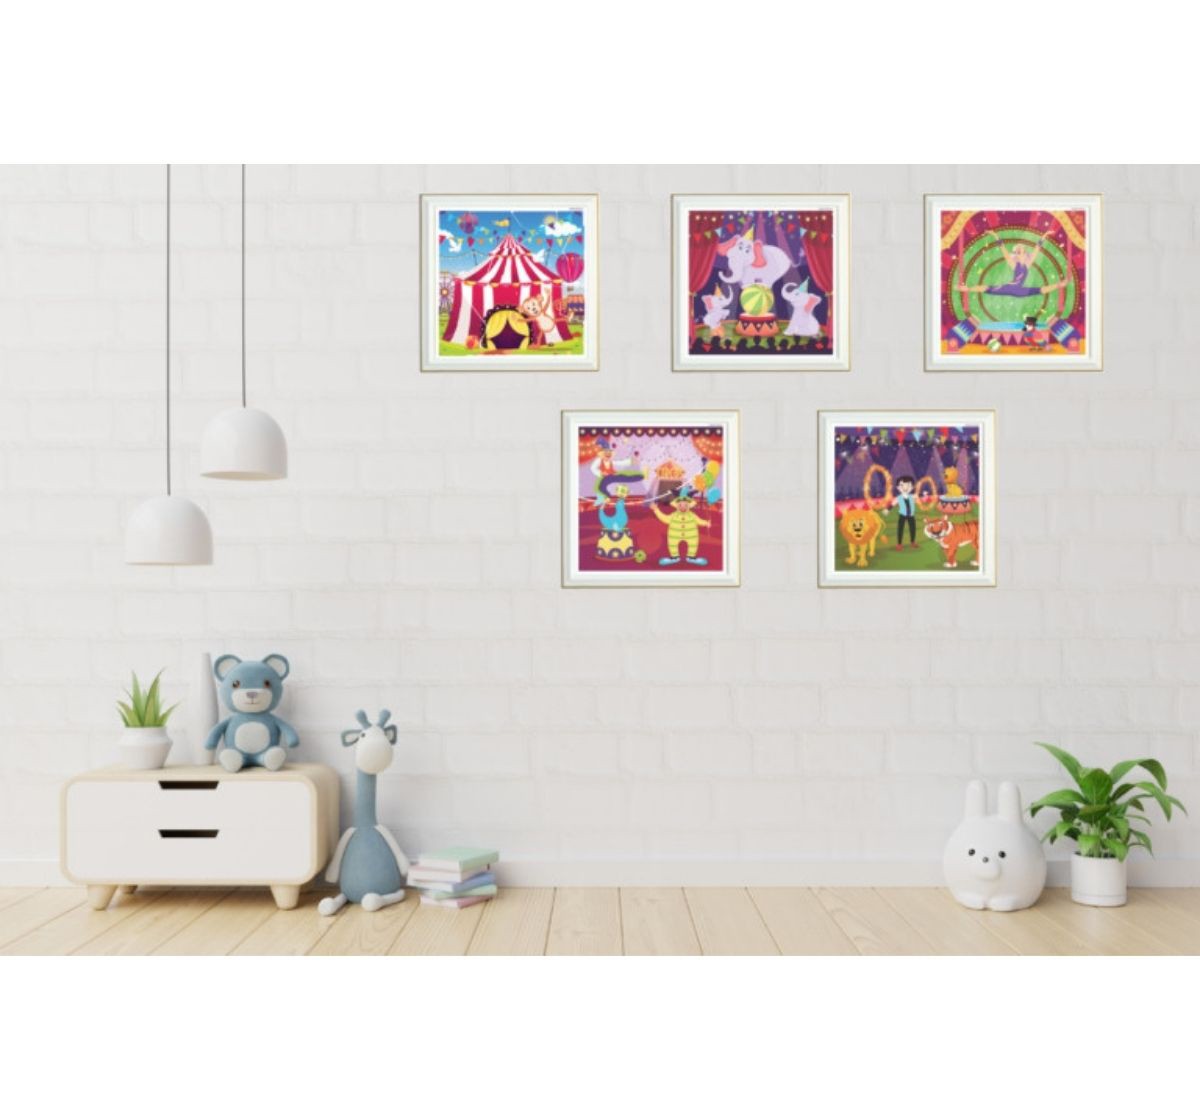 PepPlay Circus Carnival Sticker Puzzle with Set of 5 Jigsaw Puzzles 4 Years Old and Above (23 x 23 cm)